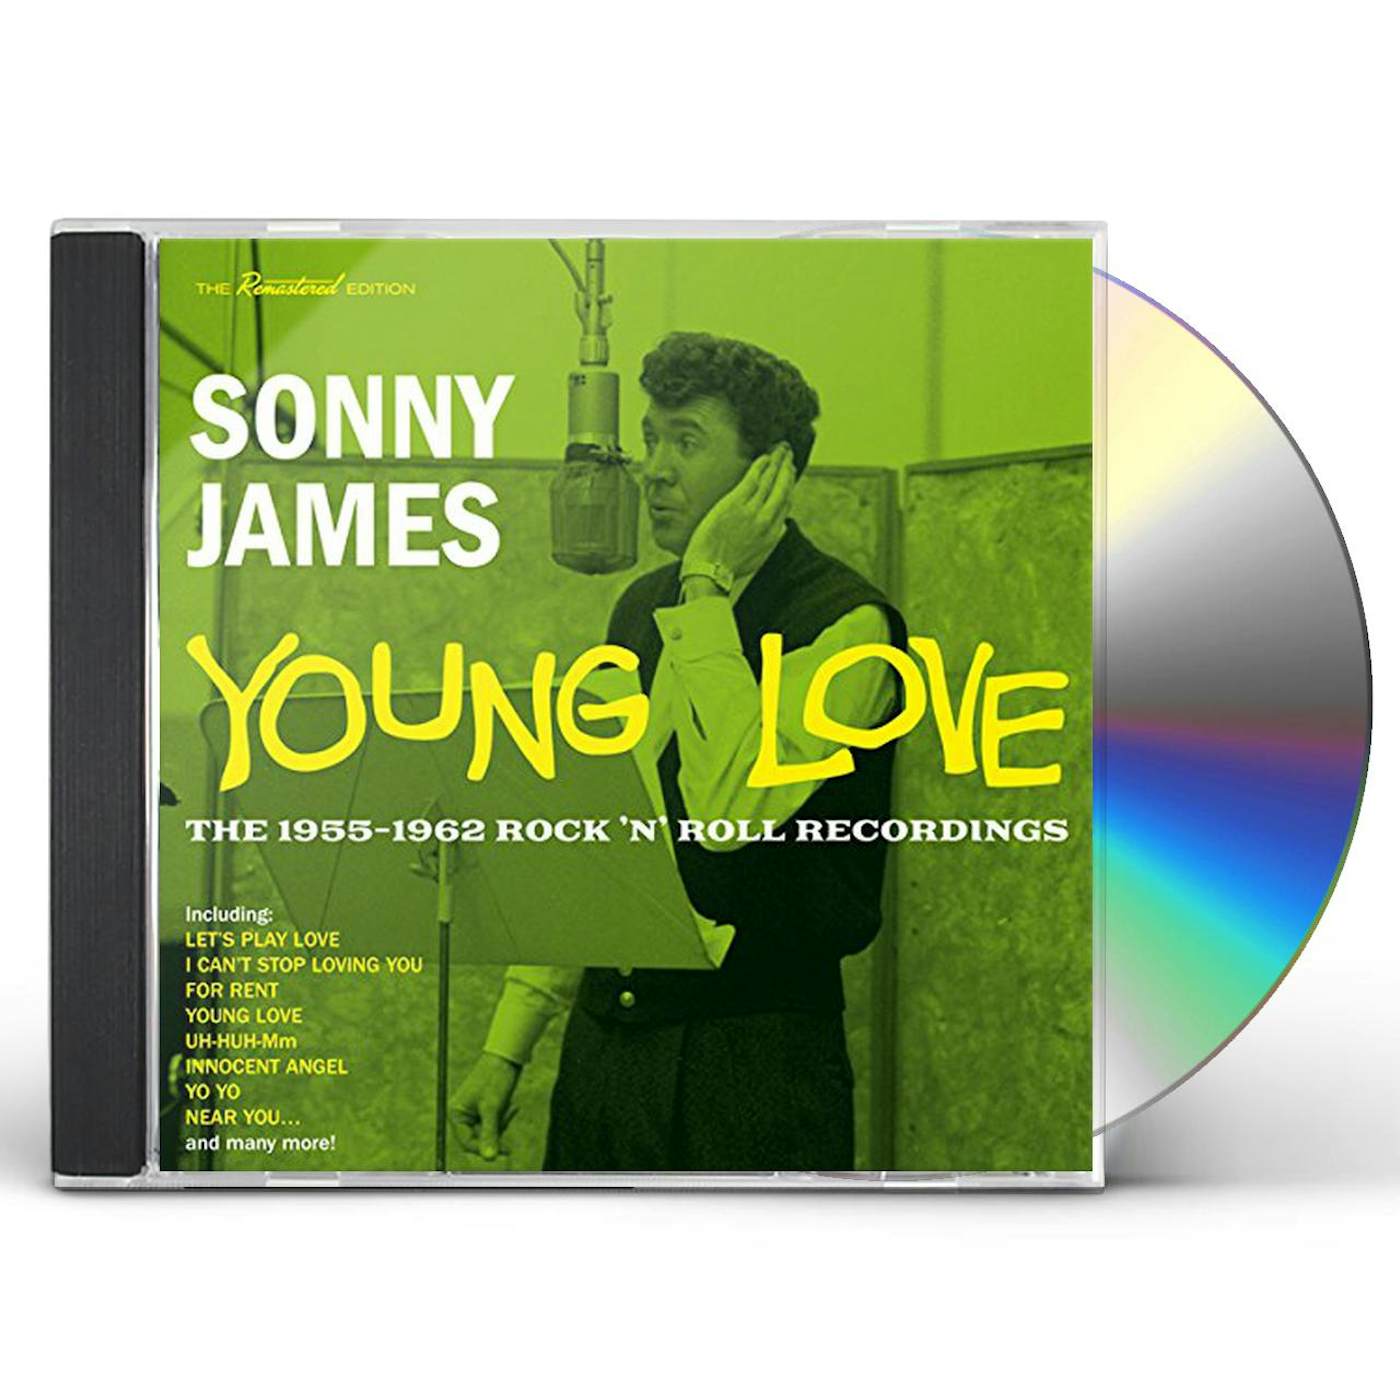 Sonny James YOUNG LOVE: 1955-1962 ROCK & ROLL RECORDINGS CD